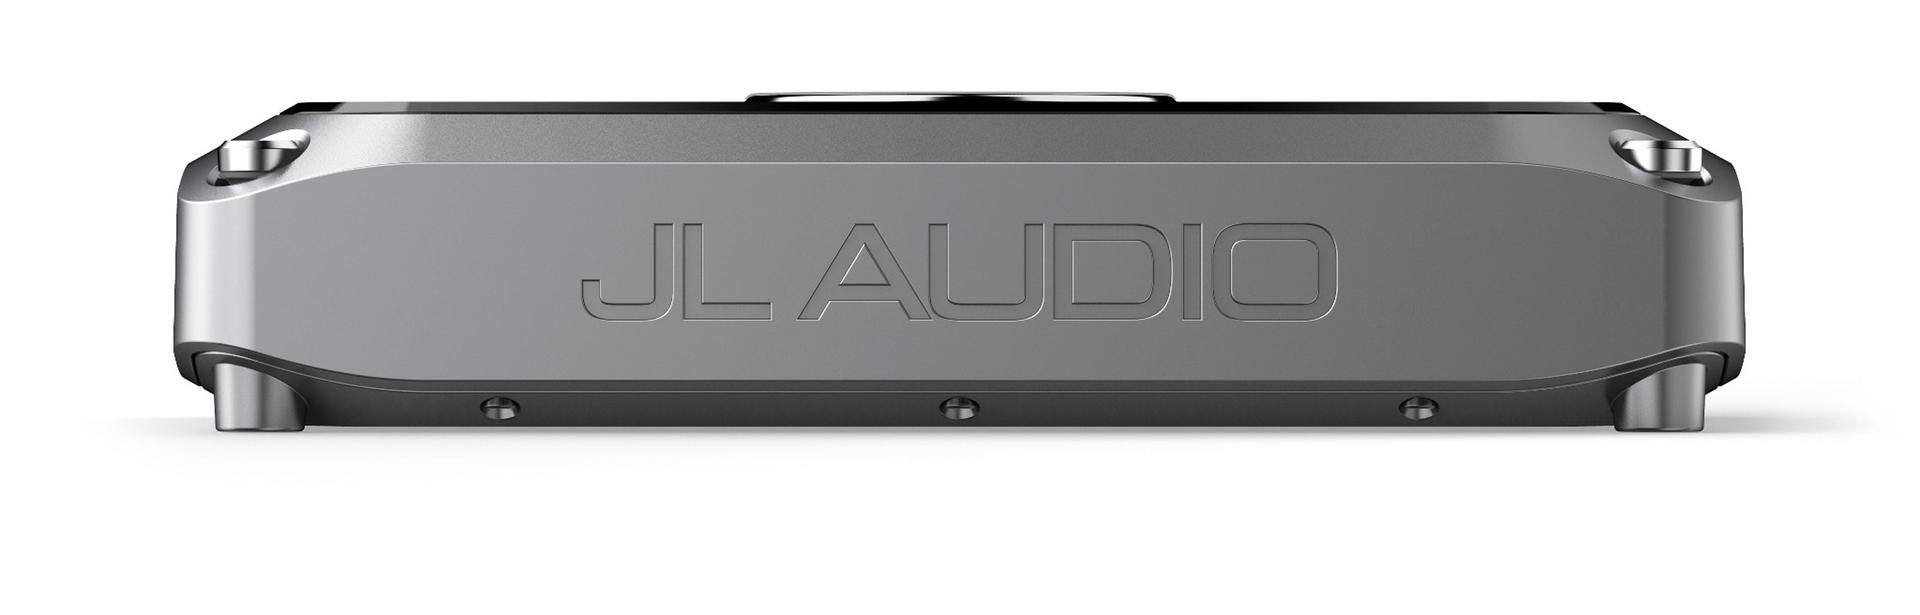 JL Audio VX700/5i 5-channel car amplifier with digital signal processing  75 watts RMS x 4 at 4 ohms + 300 watts RMS x 1 at 2 ohms